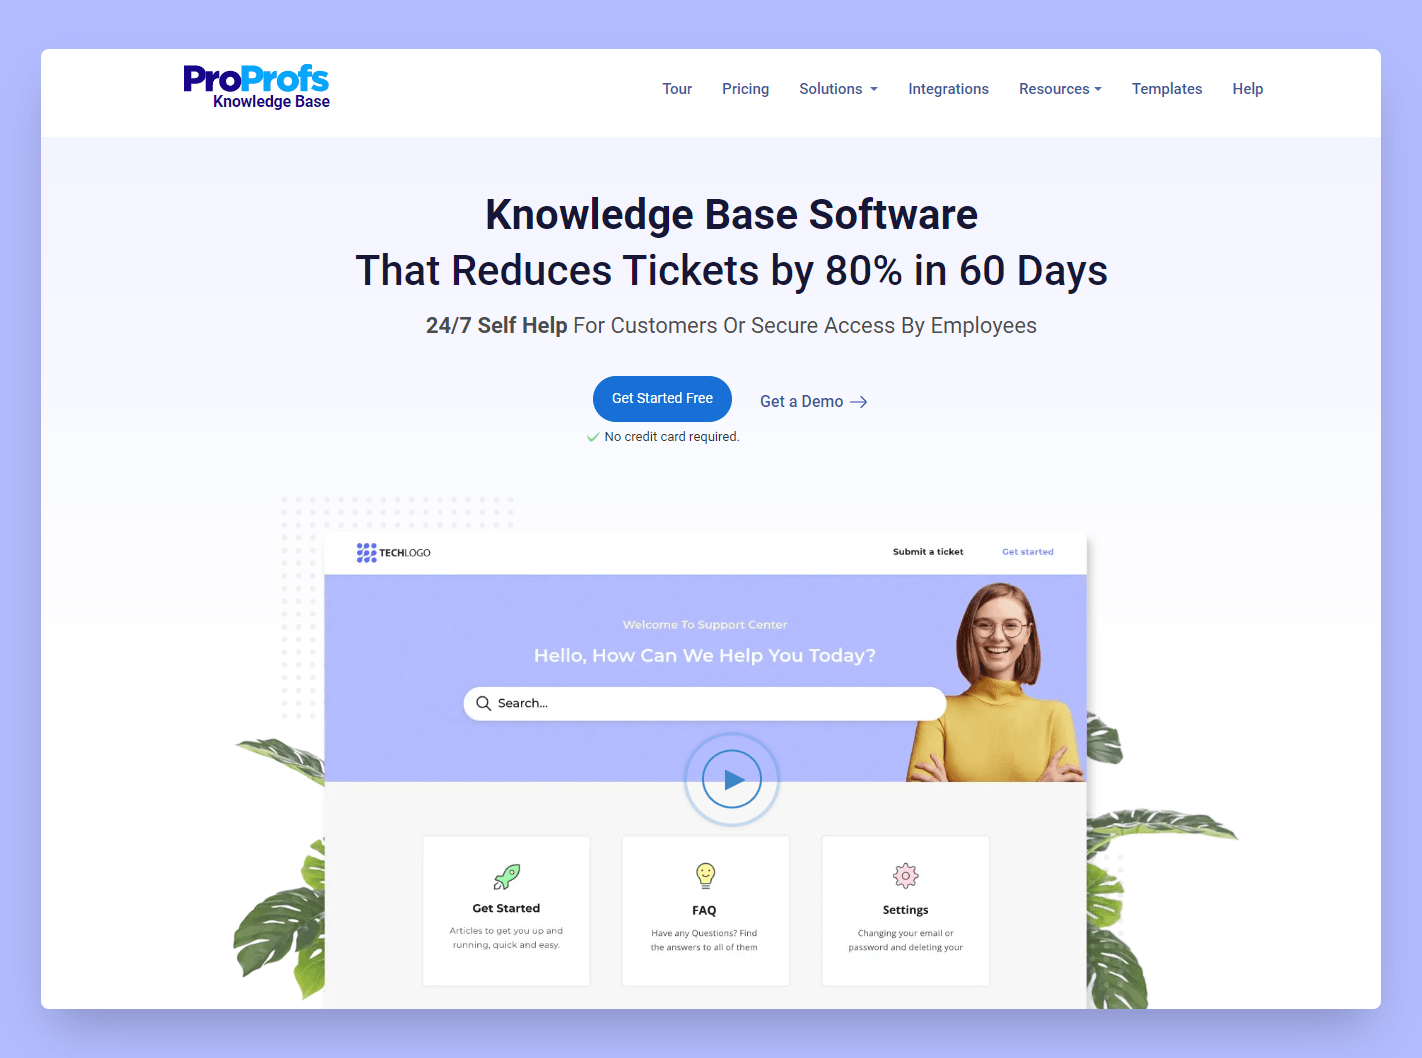 Proprofs knowledge base